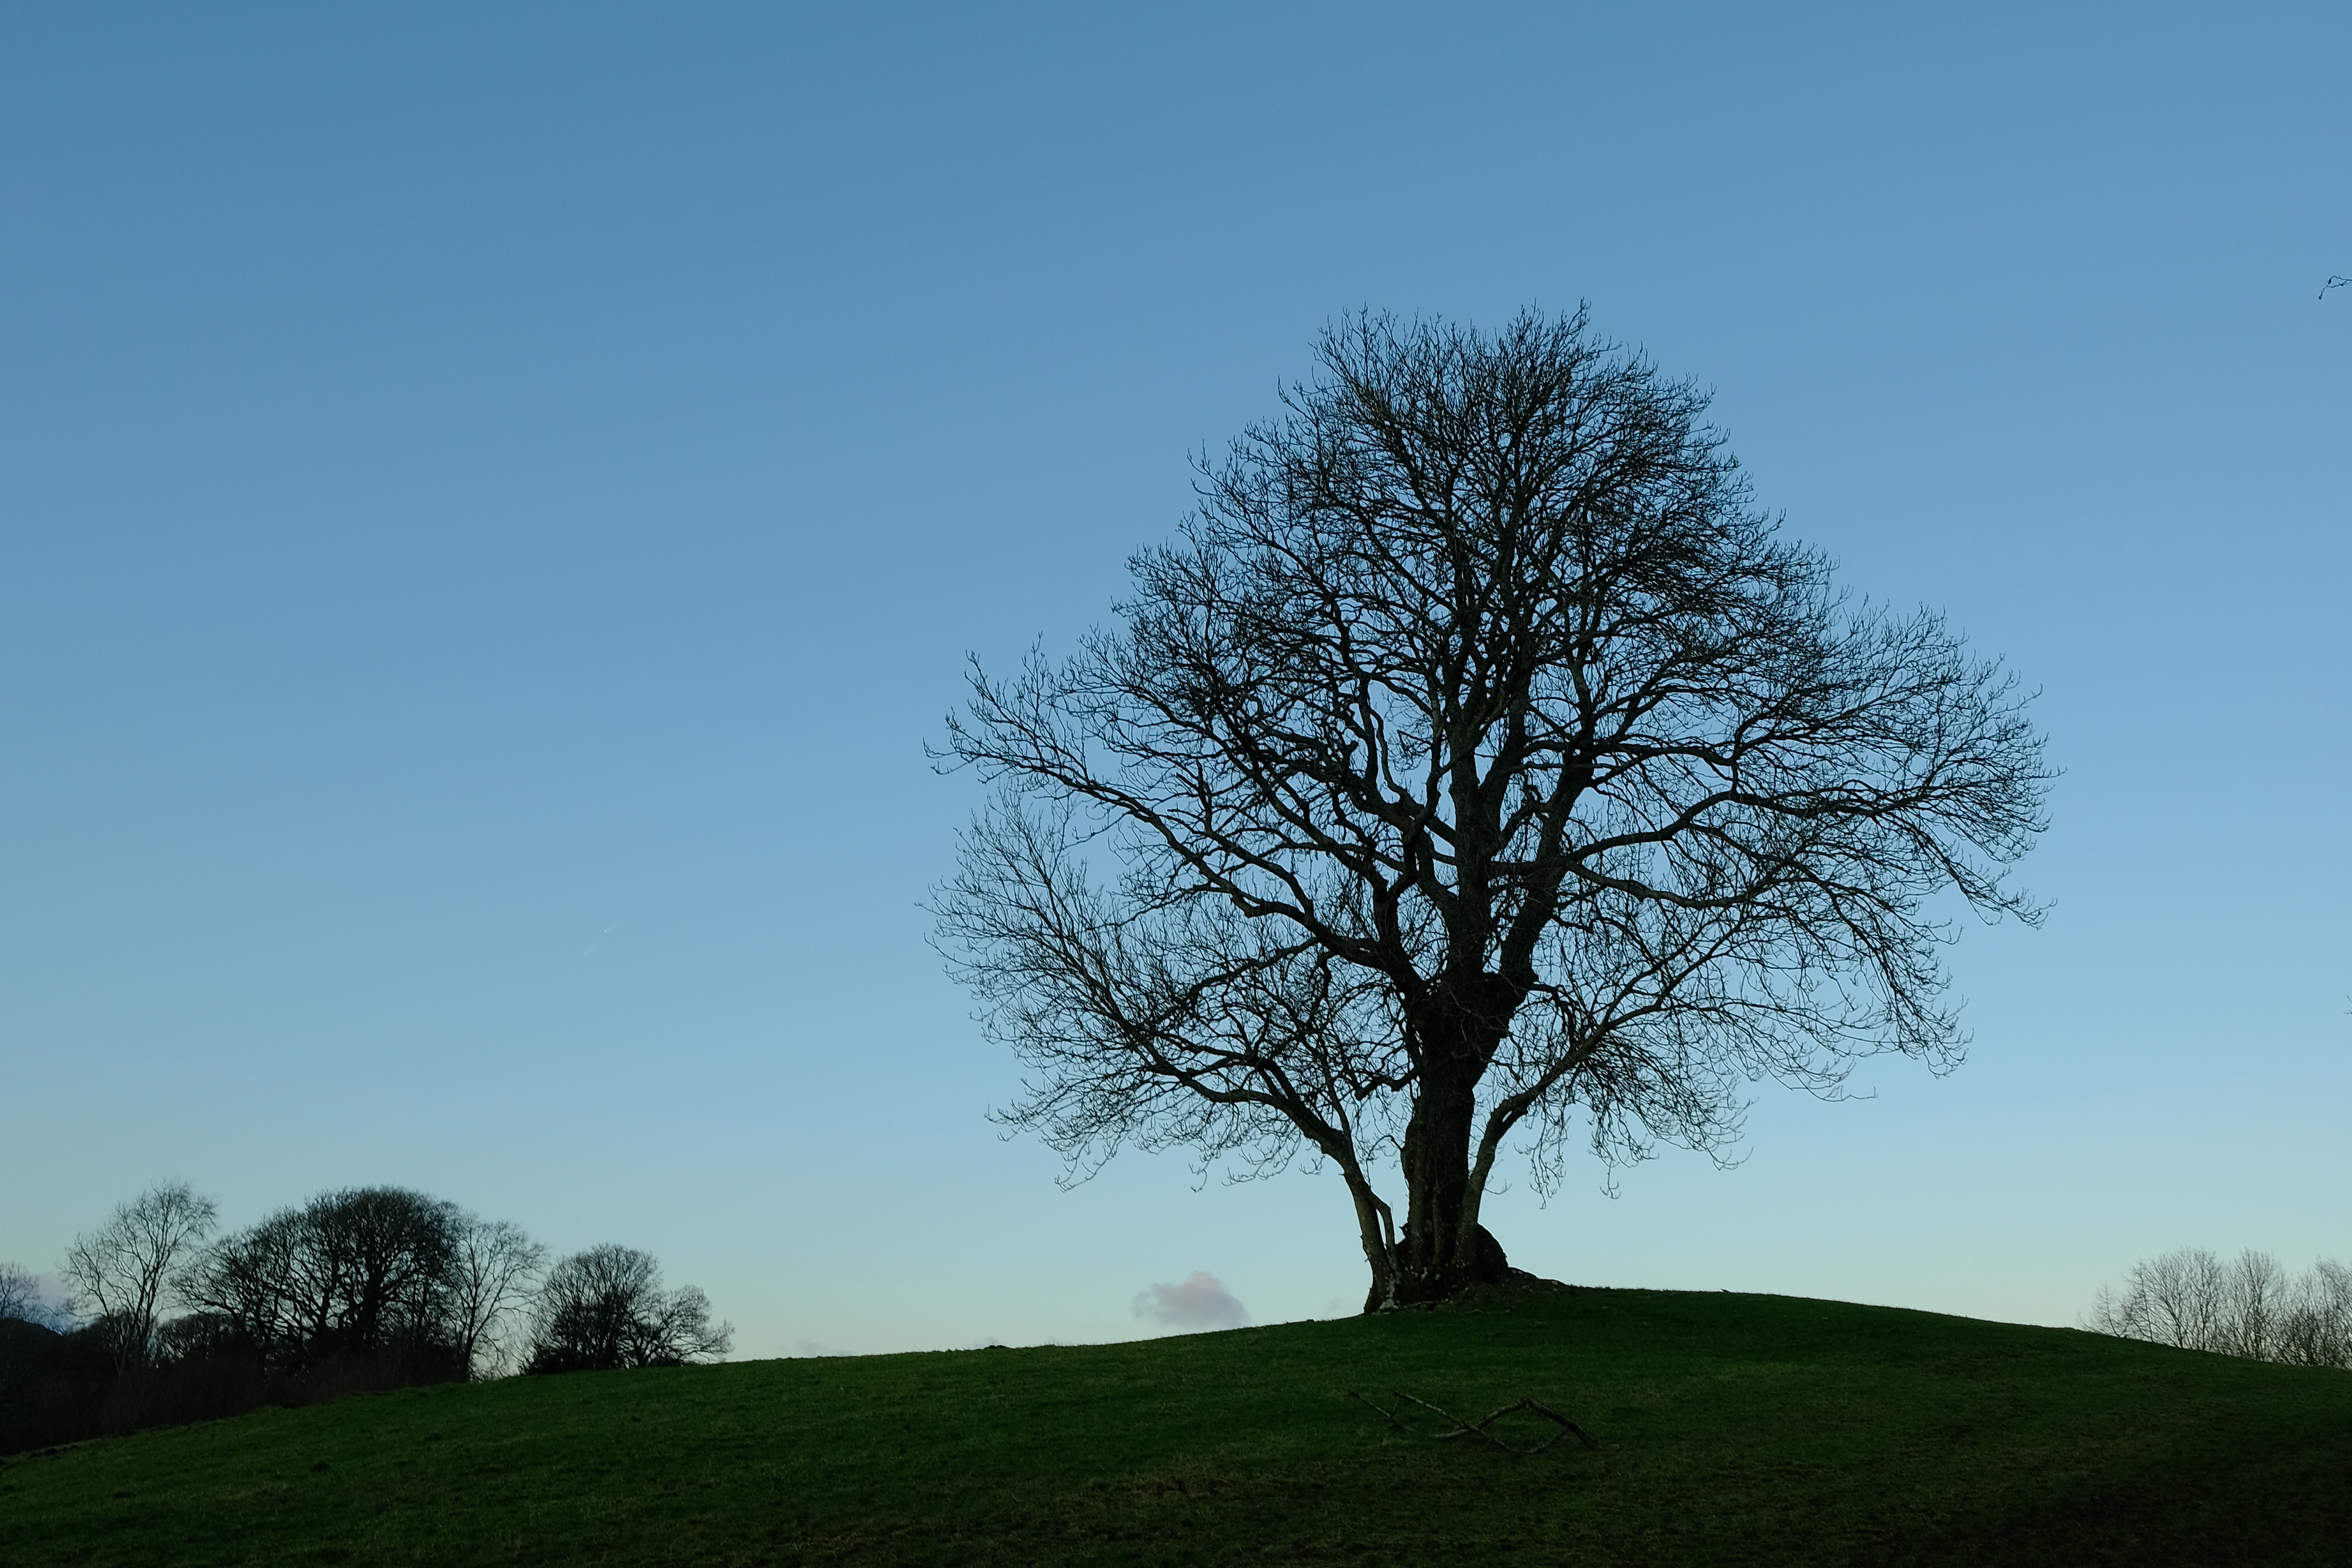 The death of ash trees are expected to change the UK landscape (Peter Tasker/National Trust/PA)